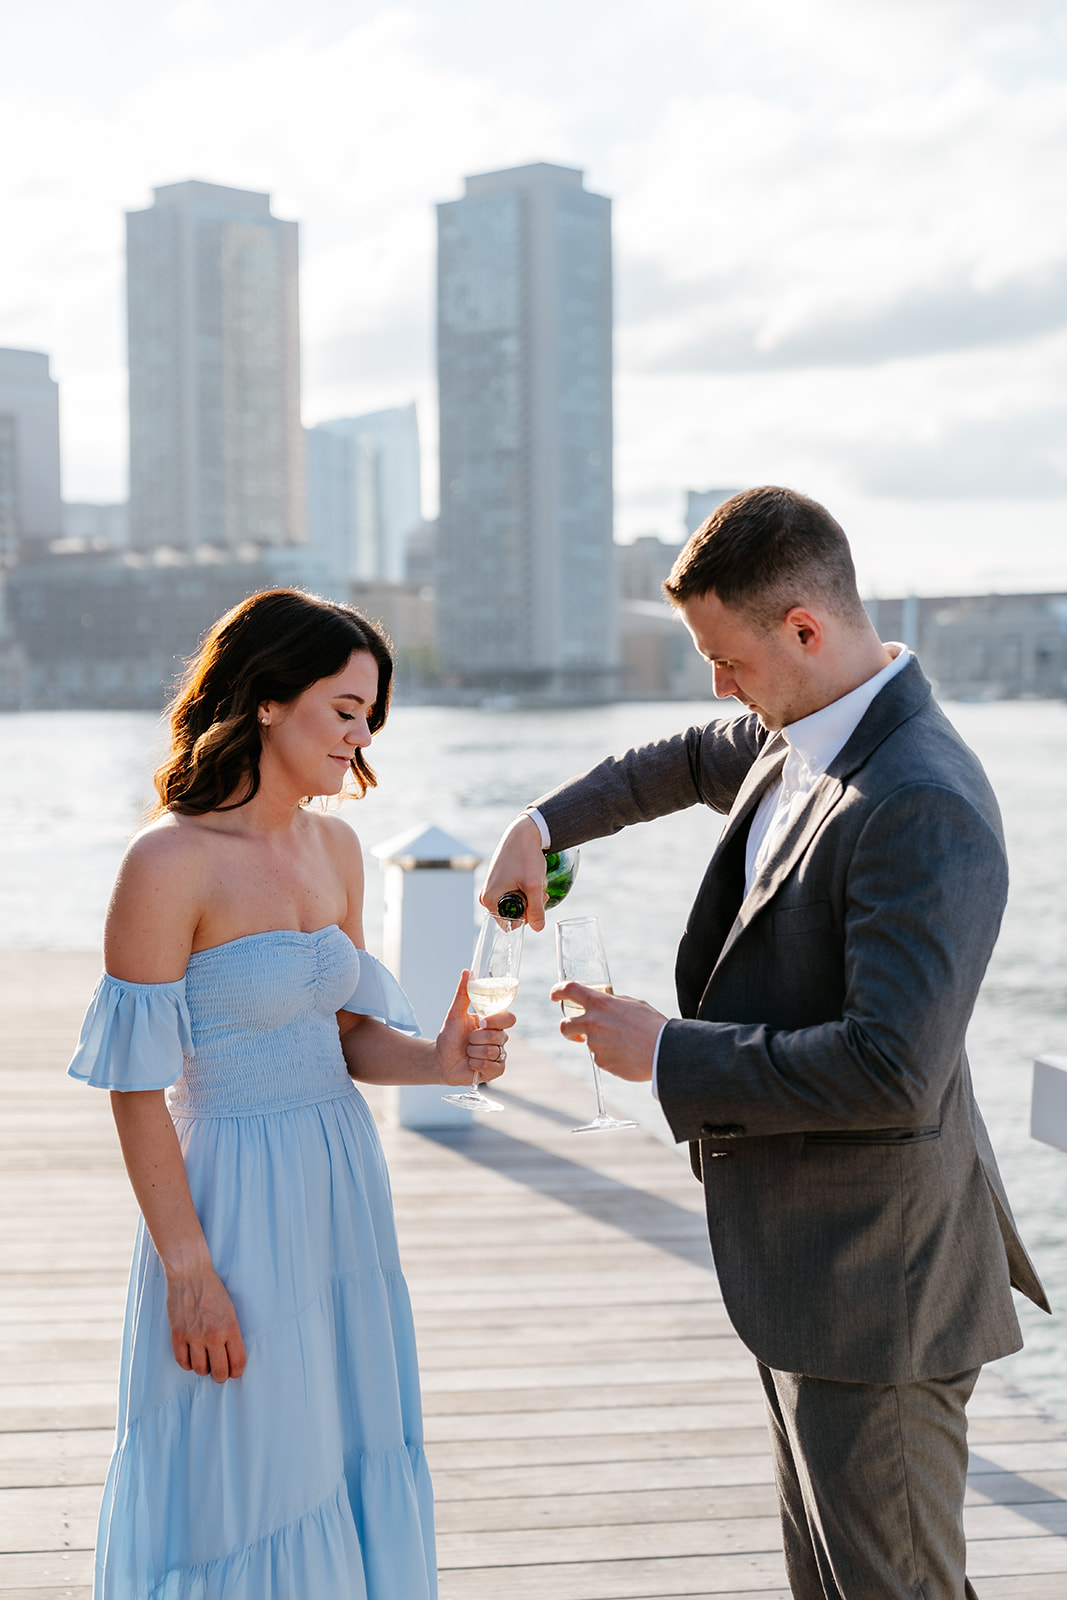 Man pouring champagne into woman's glass on a fan pier park with city skyline in the background as they take Boston engagement photos